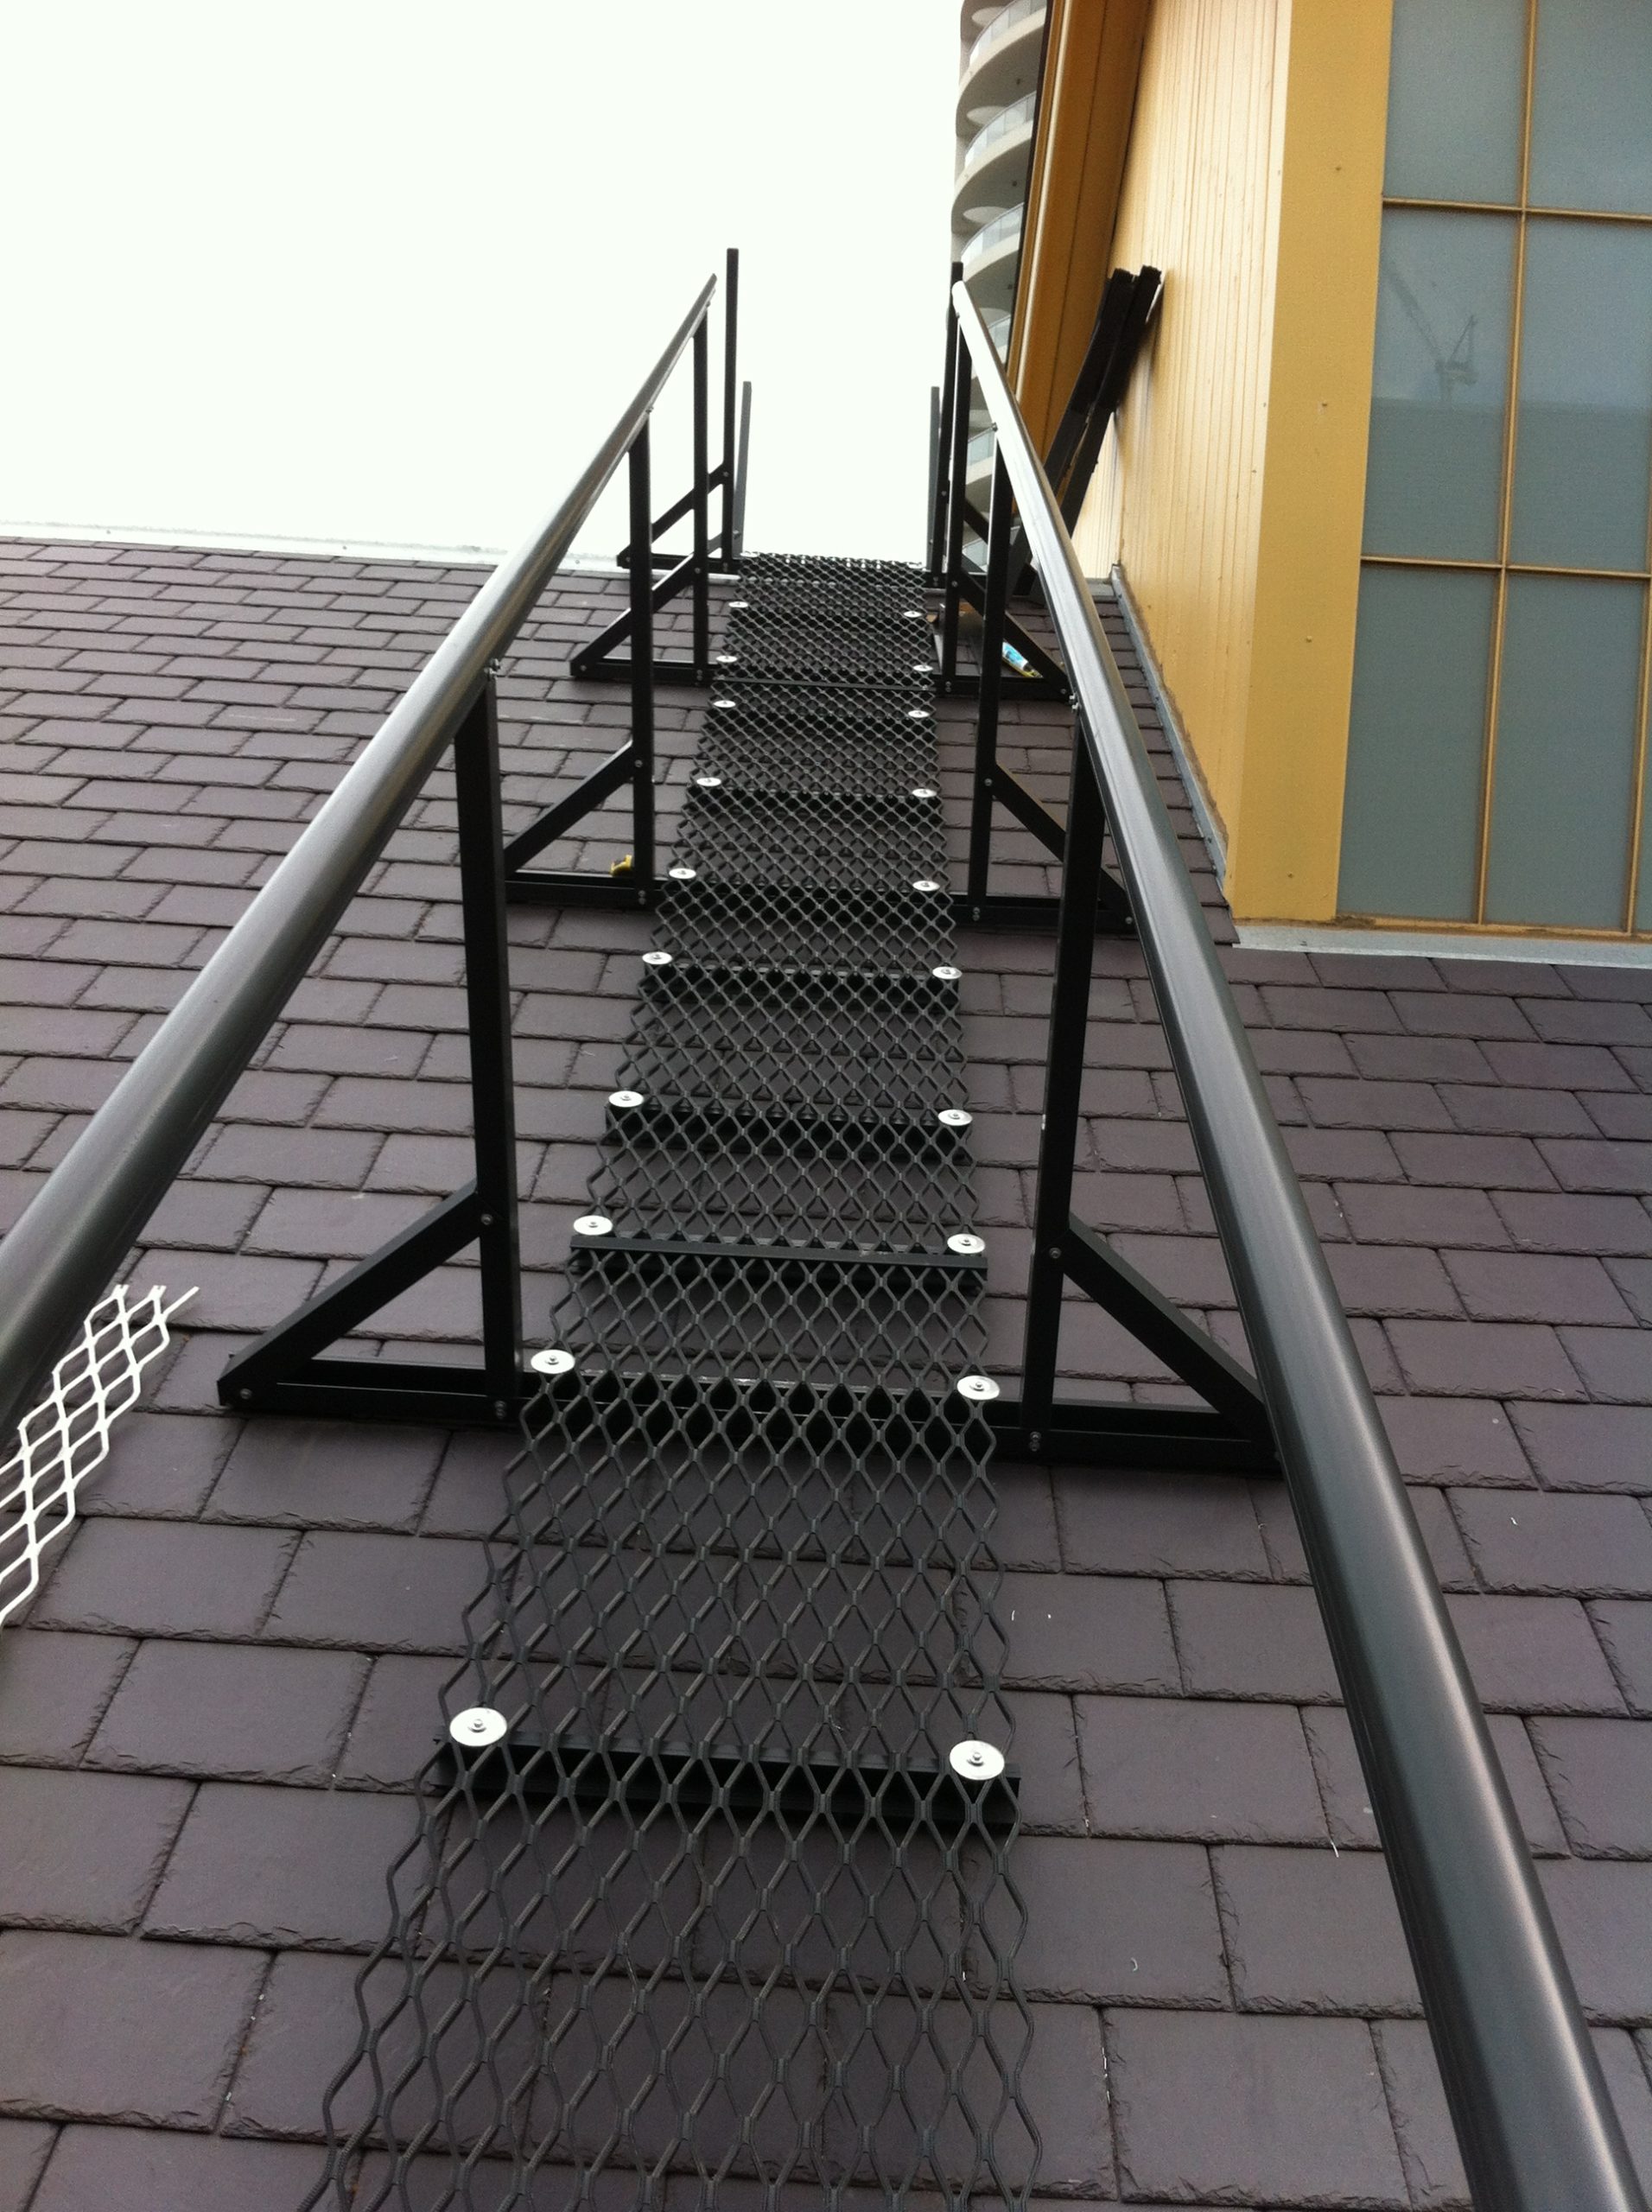 Walkway System With Handrail